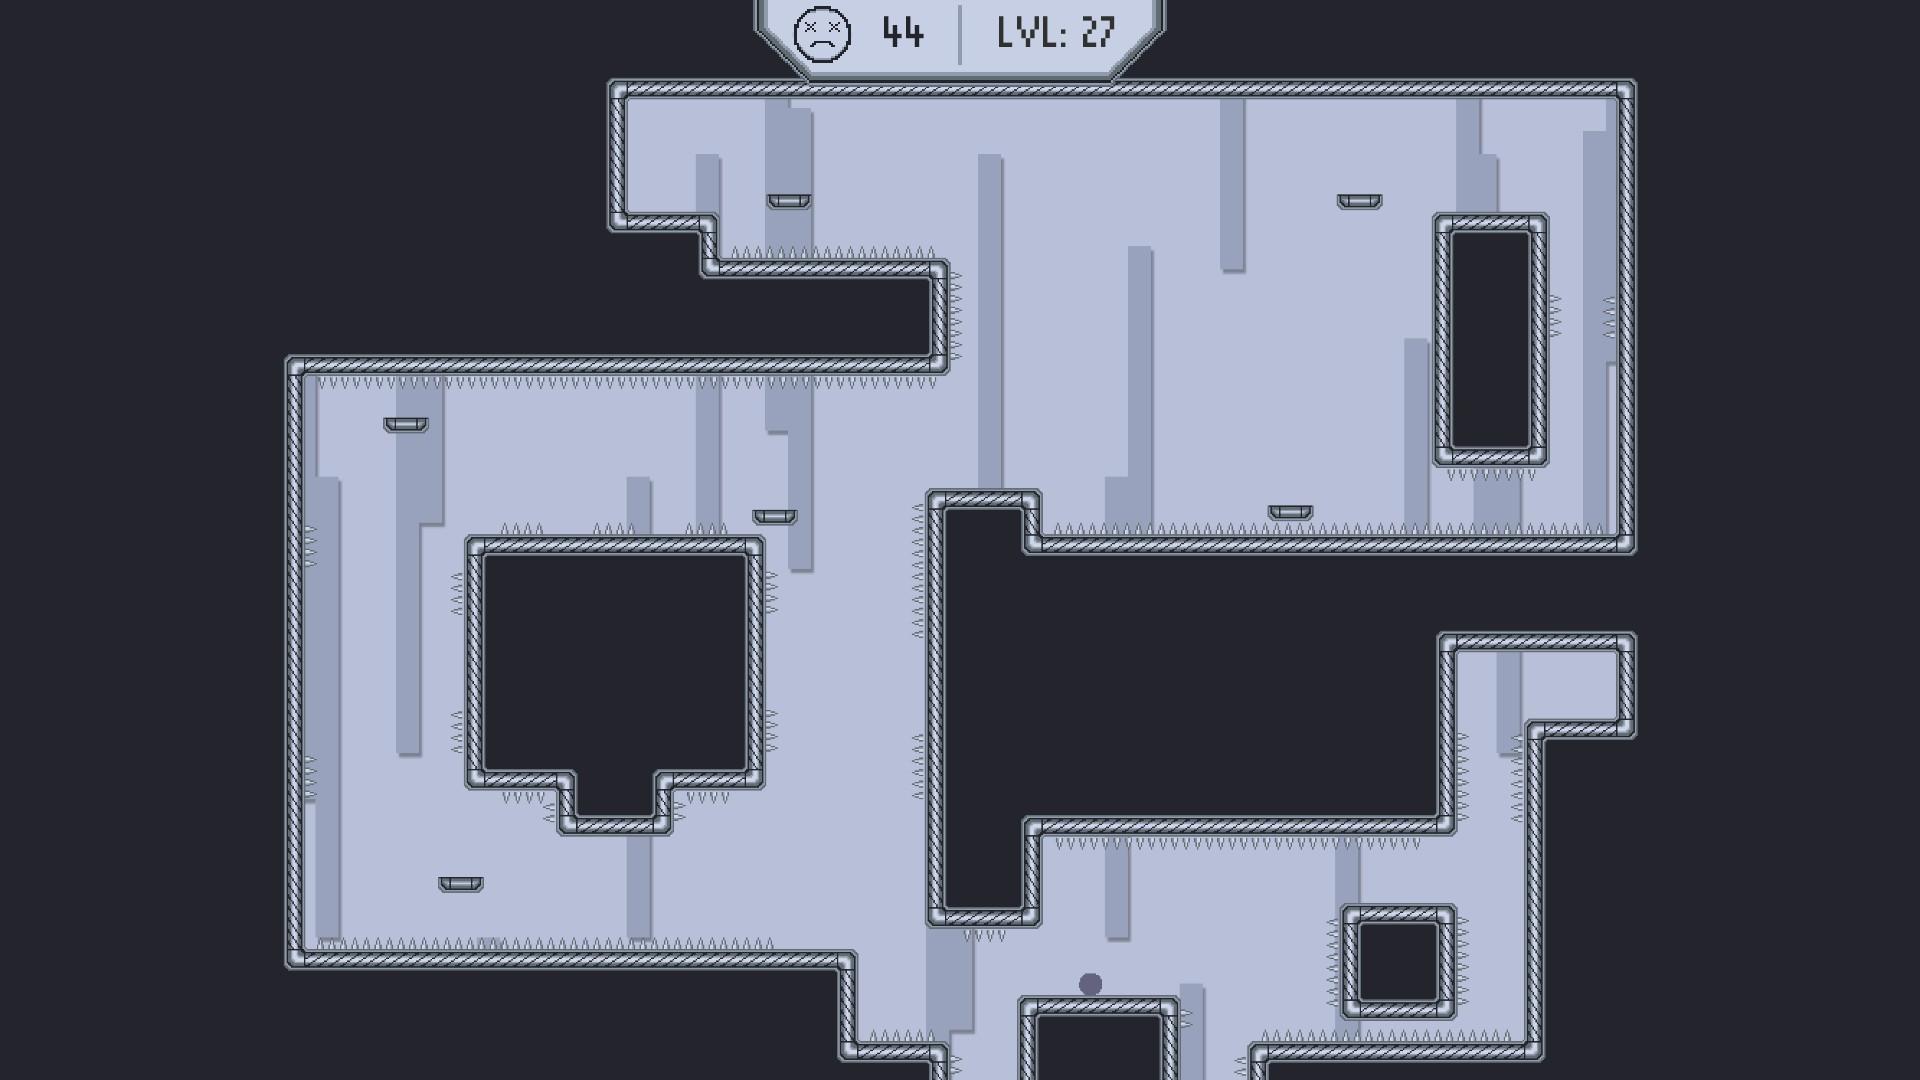 Screenshot №5 from game Ball laB